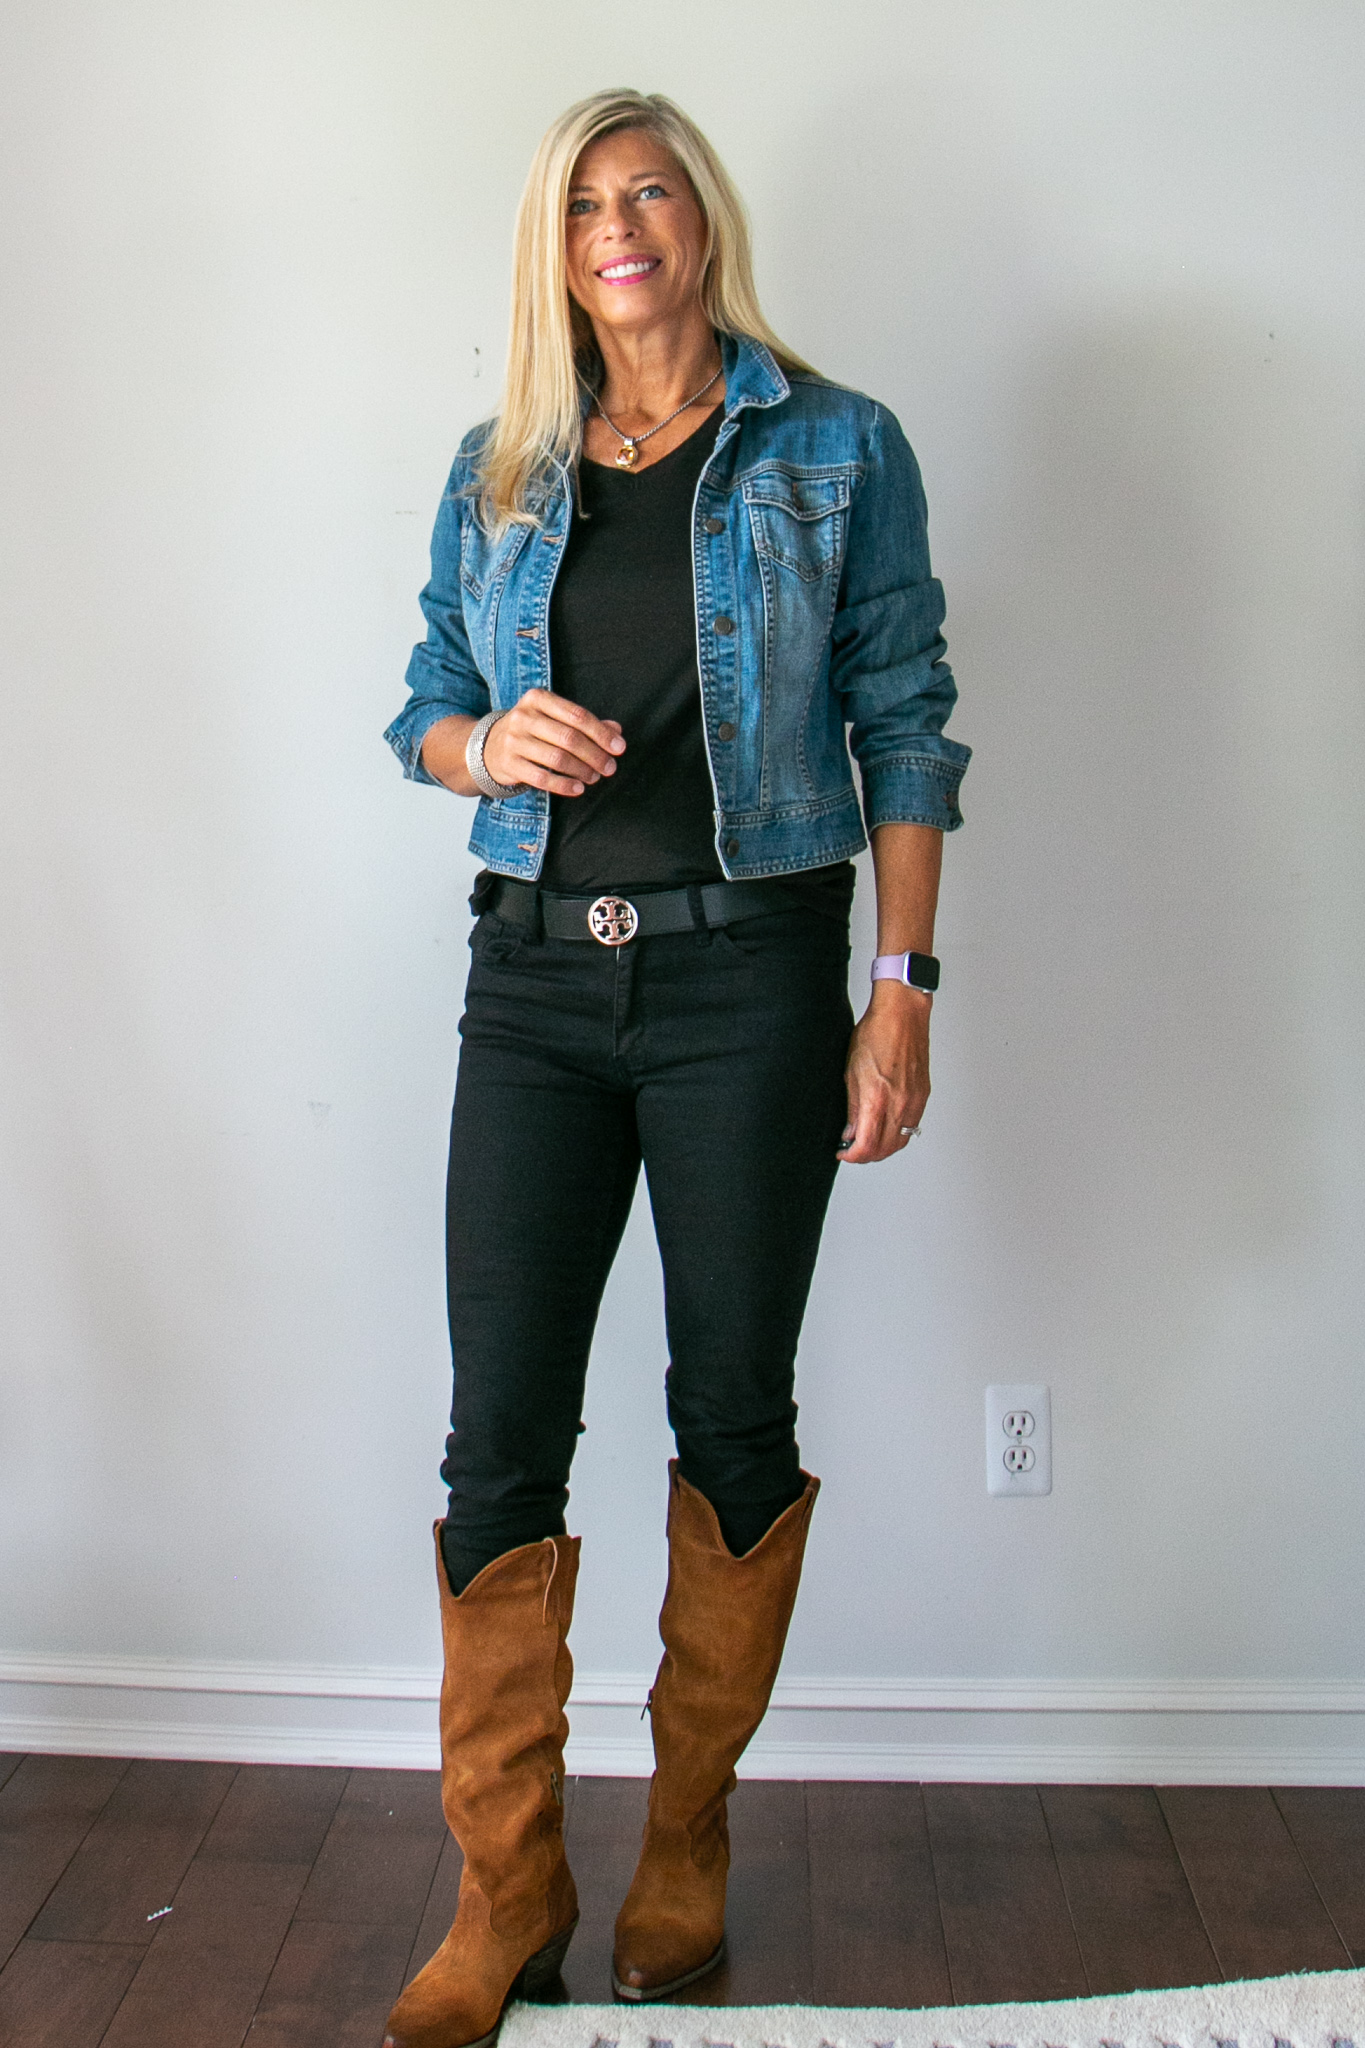 Denim Jacket Outfits Skinny Jeans with Boots